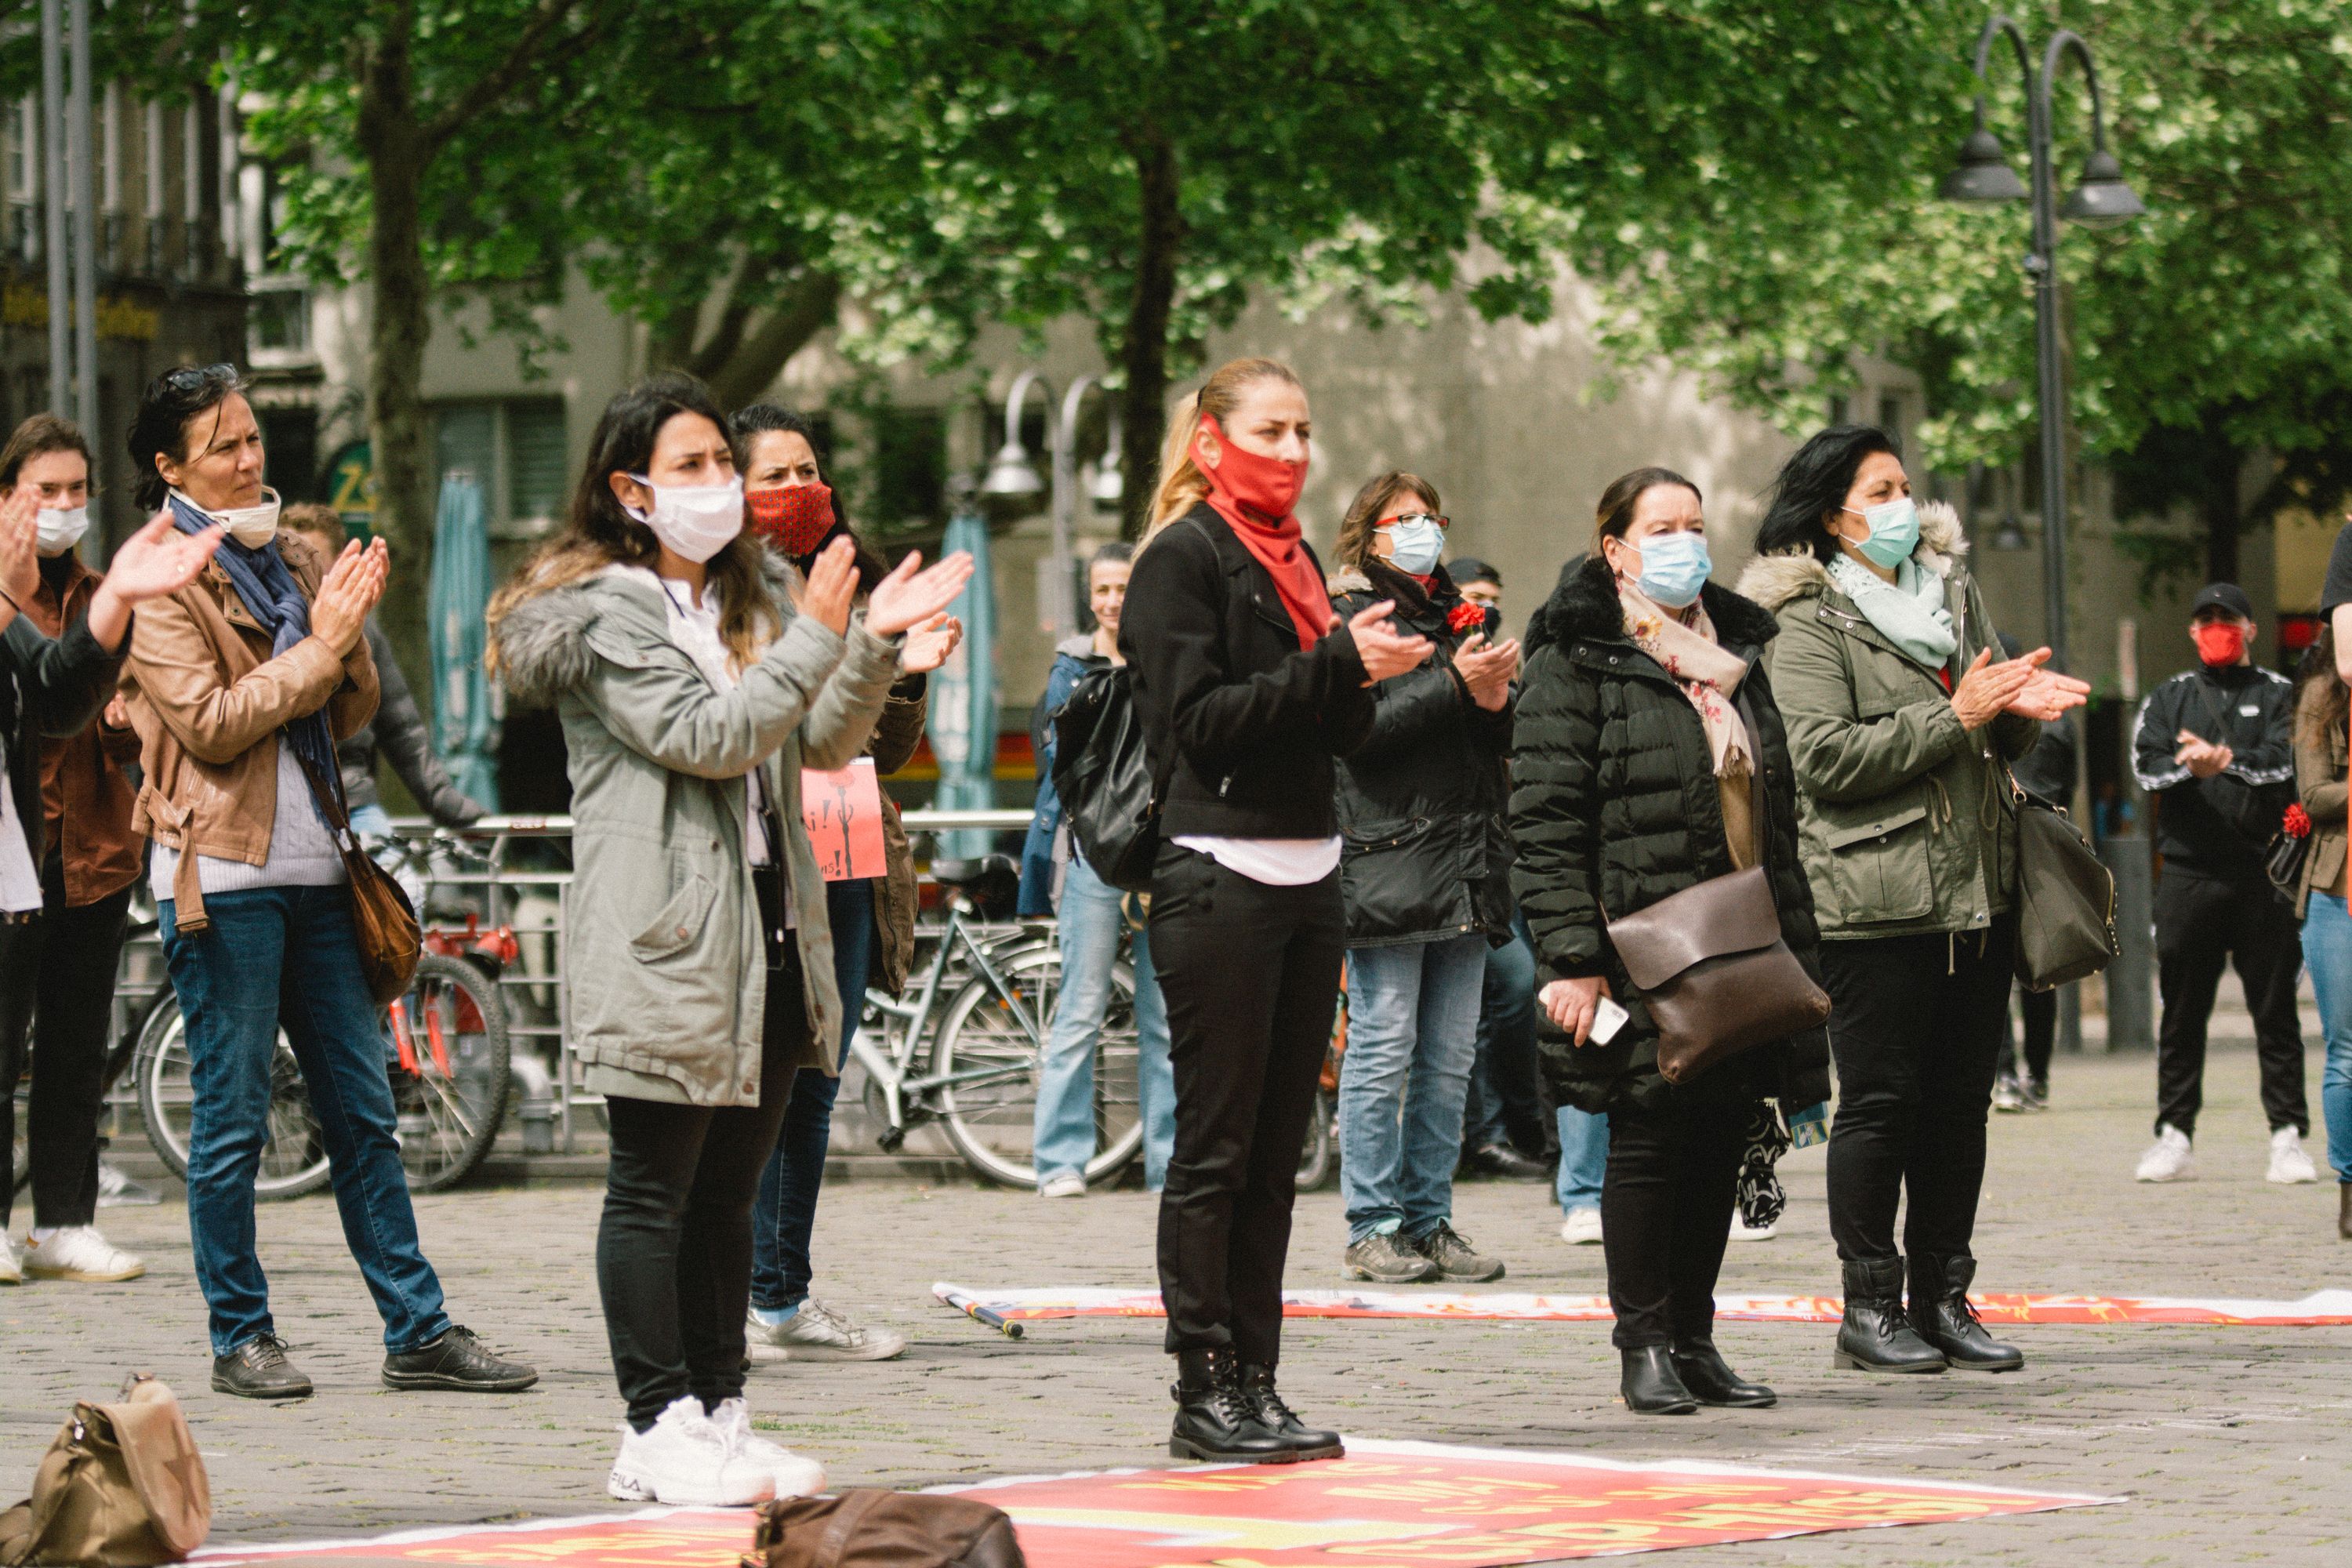 In this image, a line of protestors stand socially distanced while wearing face masks